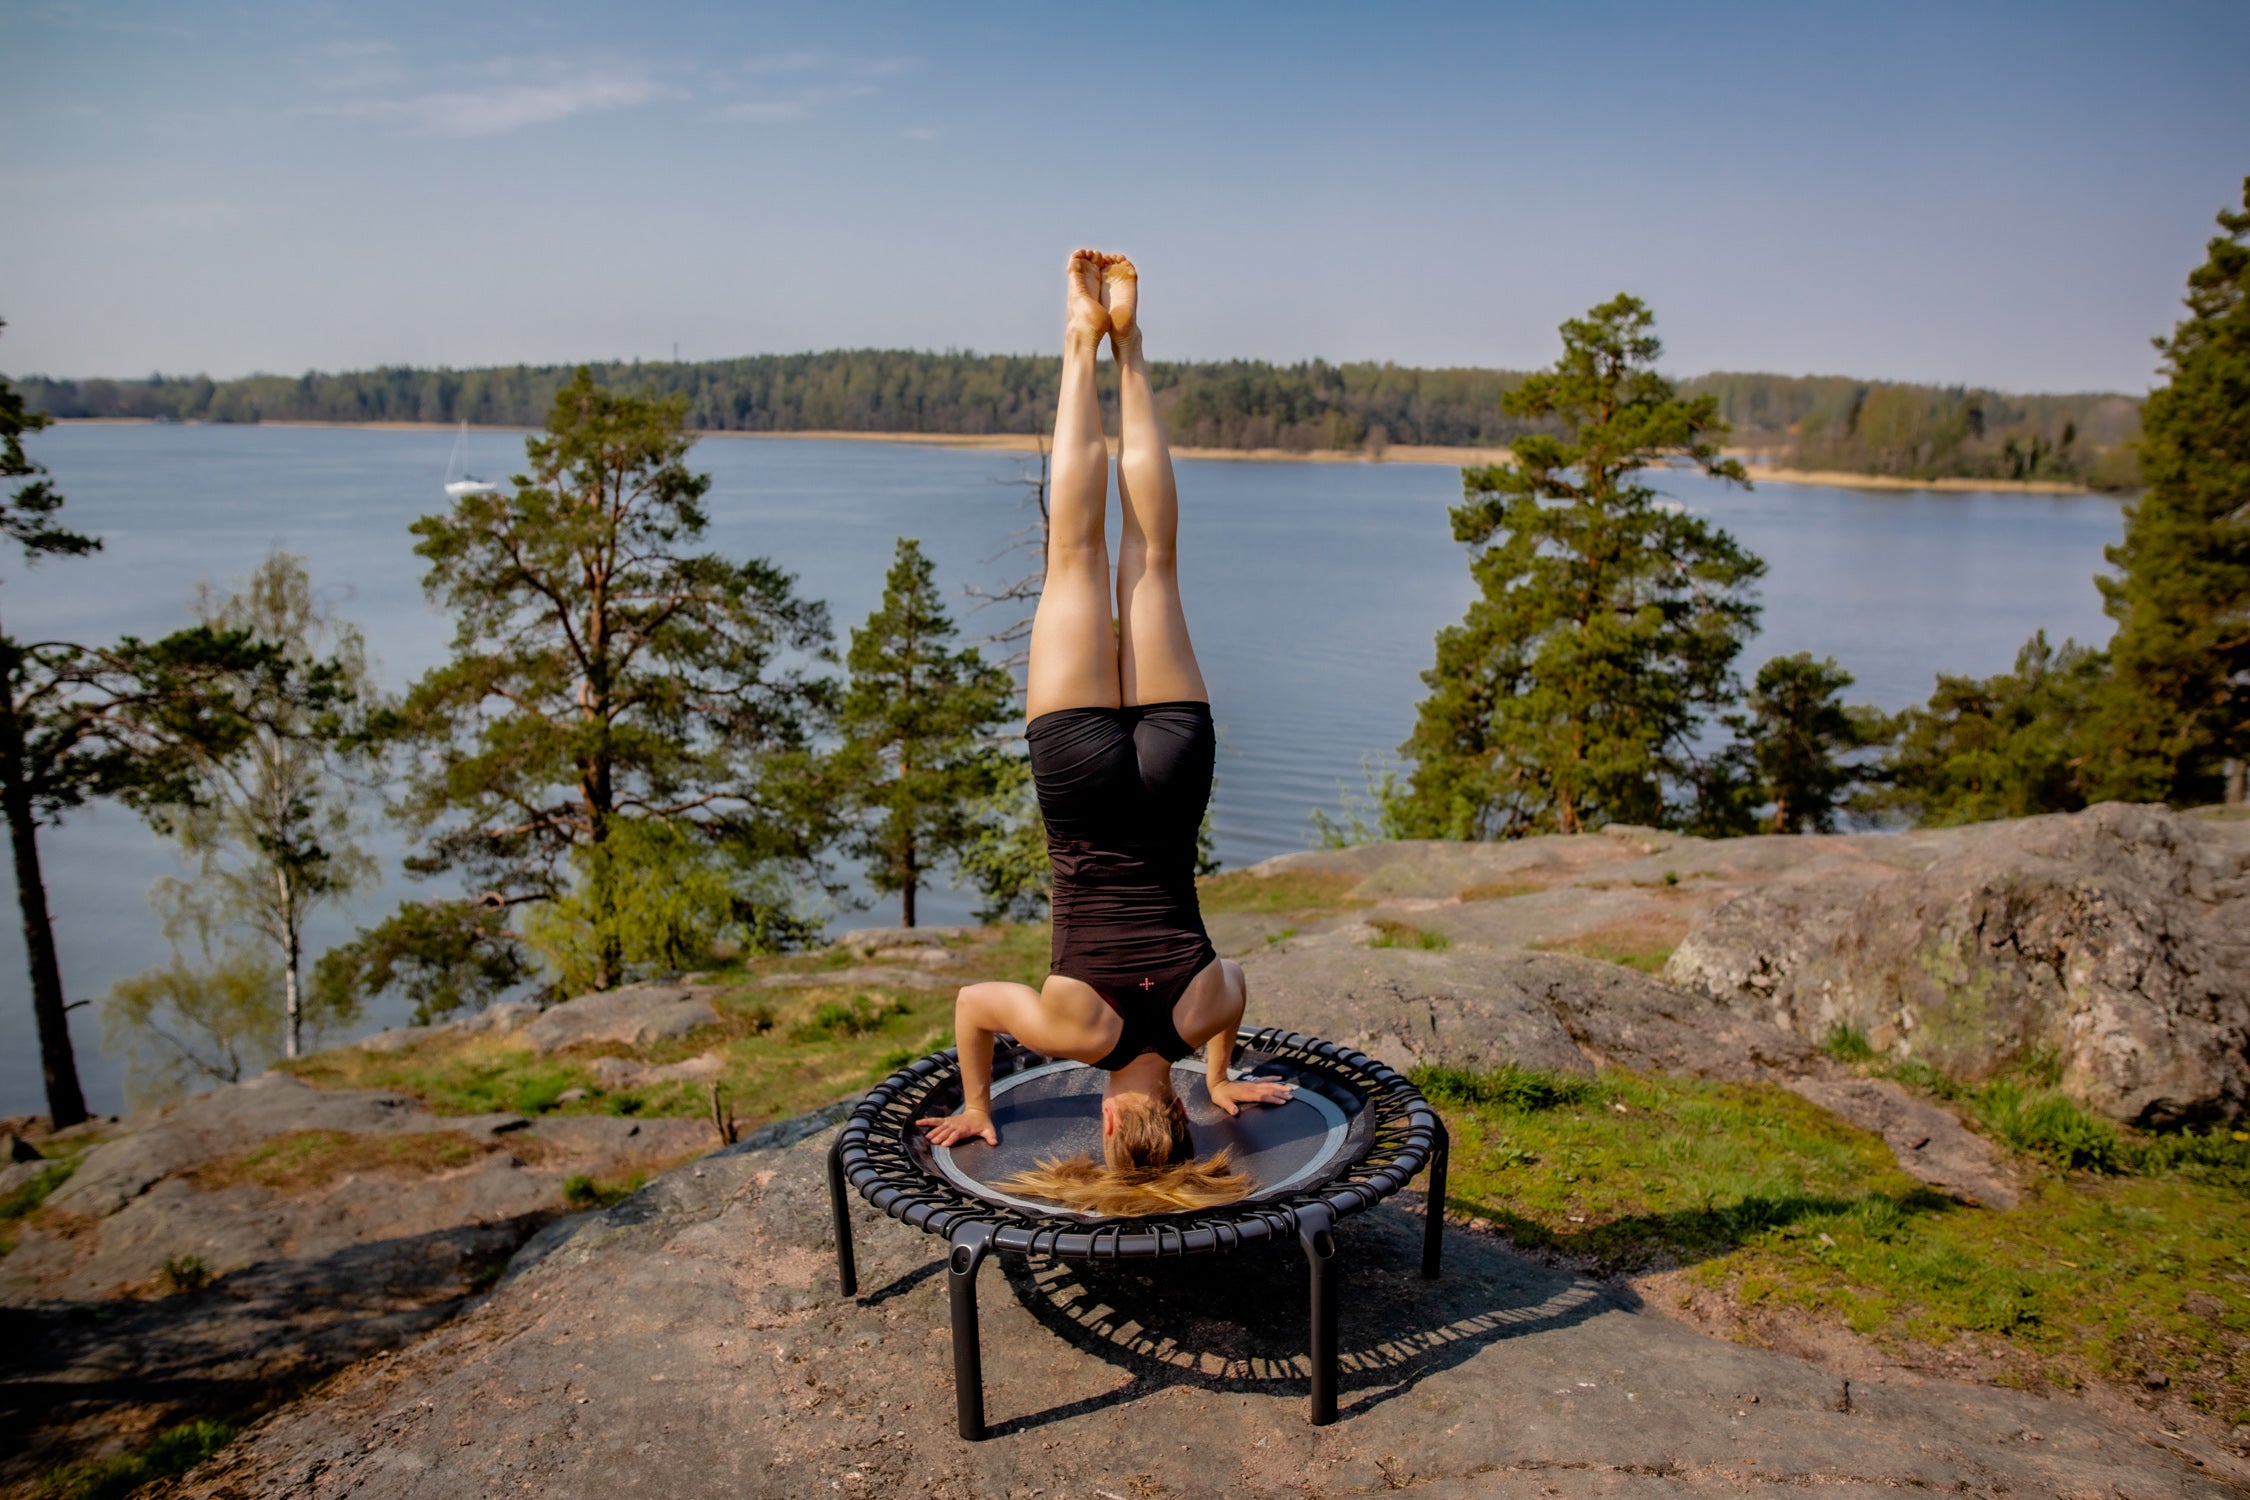 A woman doing a headstand on a mini fitness trampoline outdoors in the forest